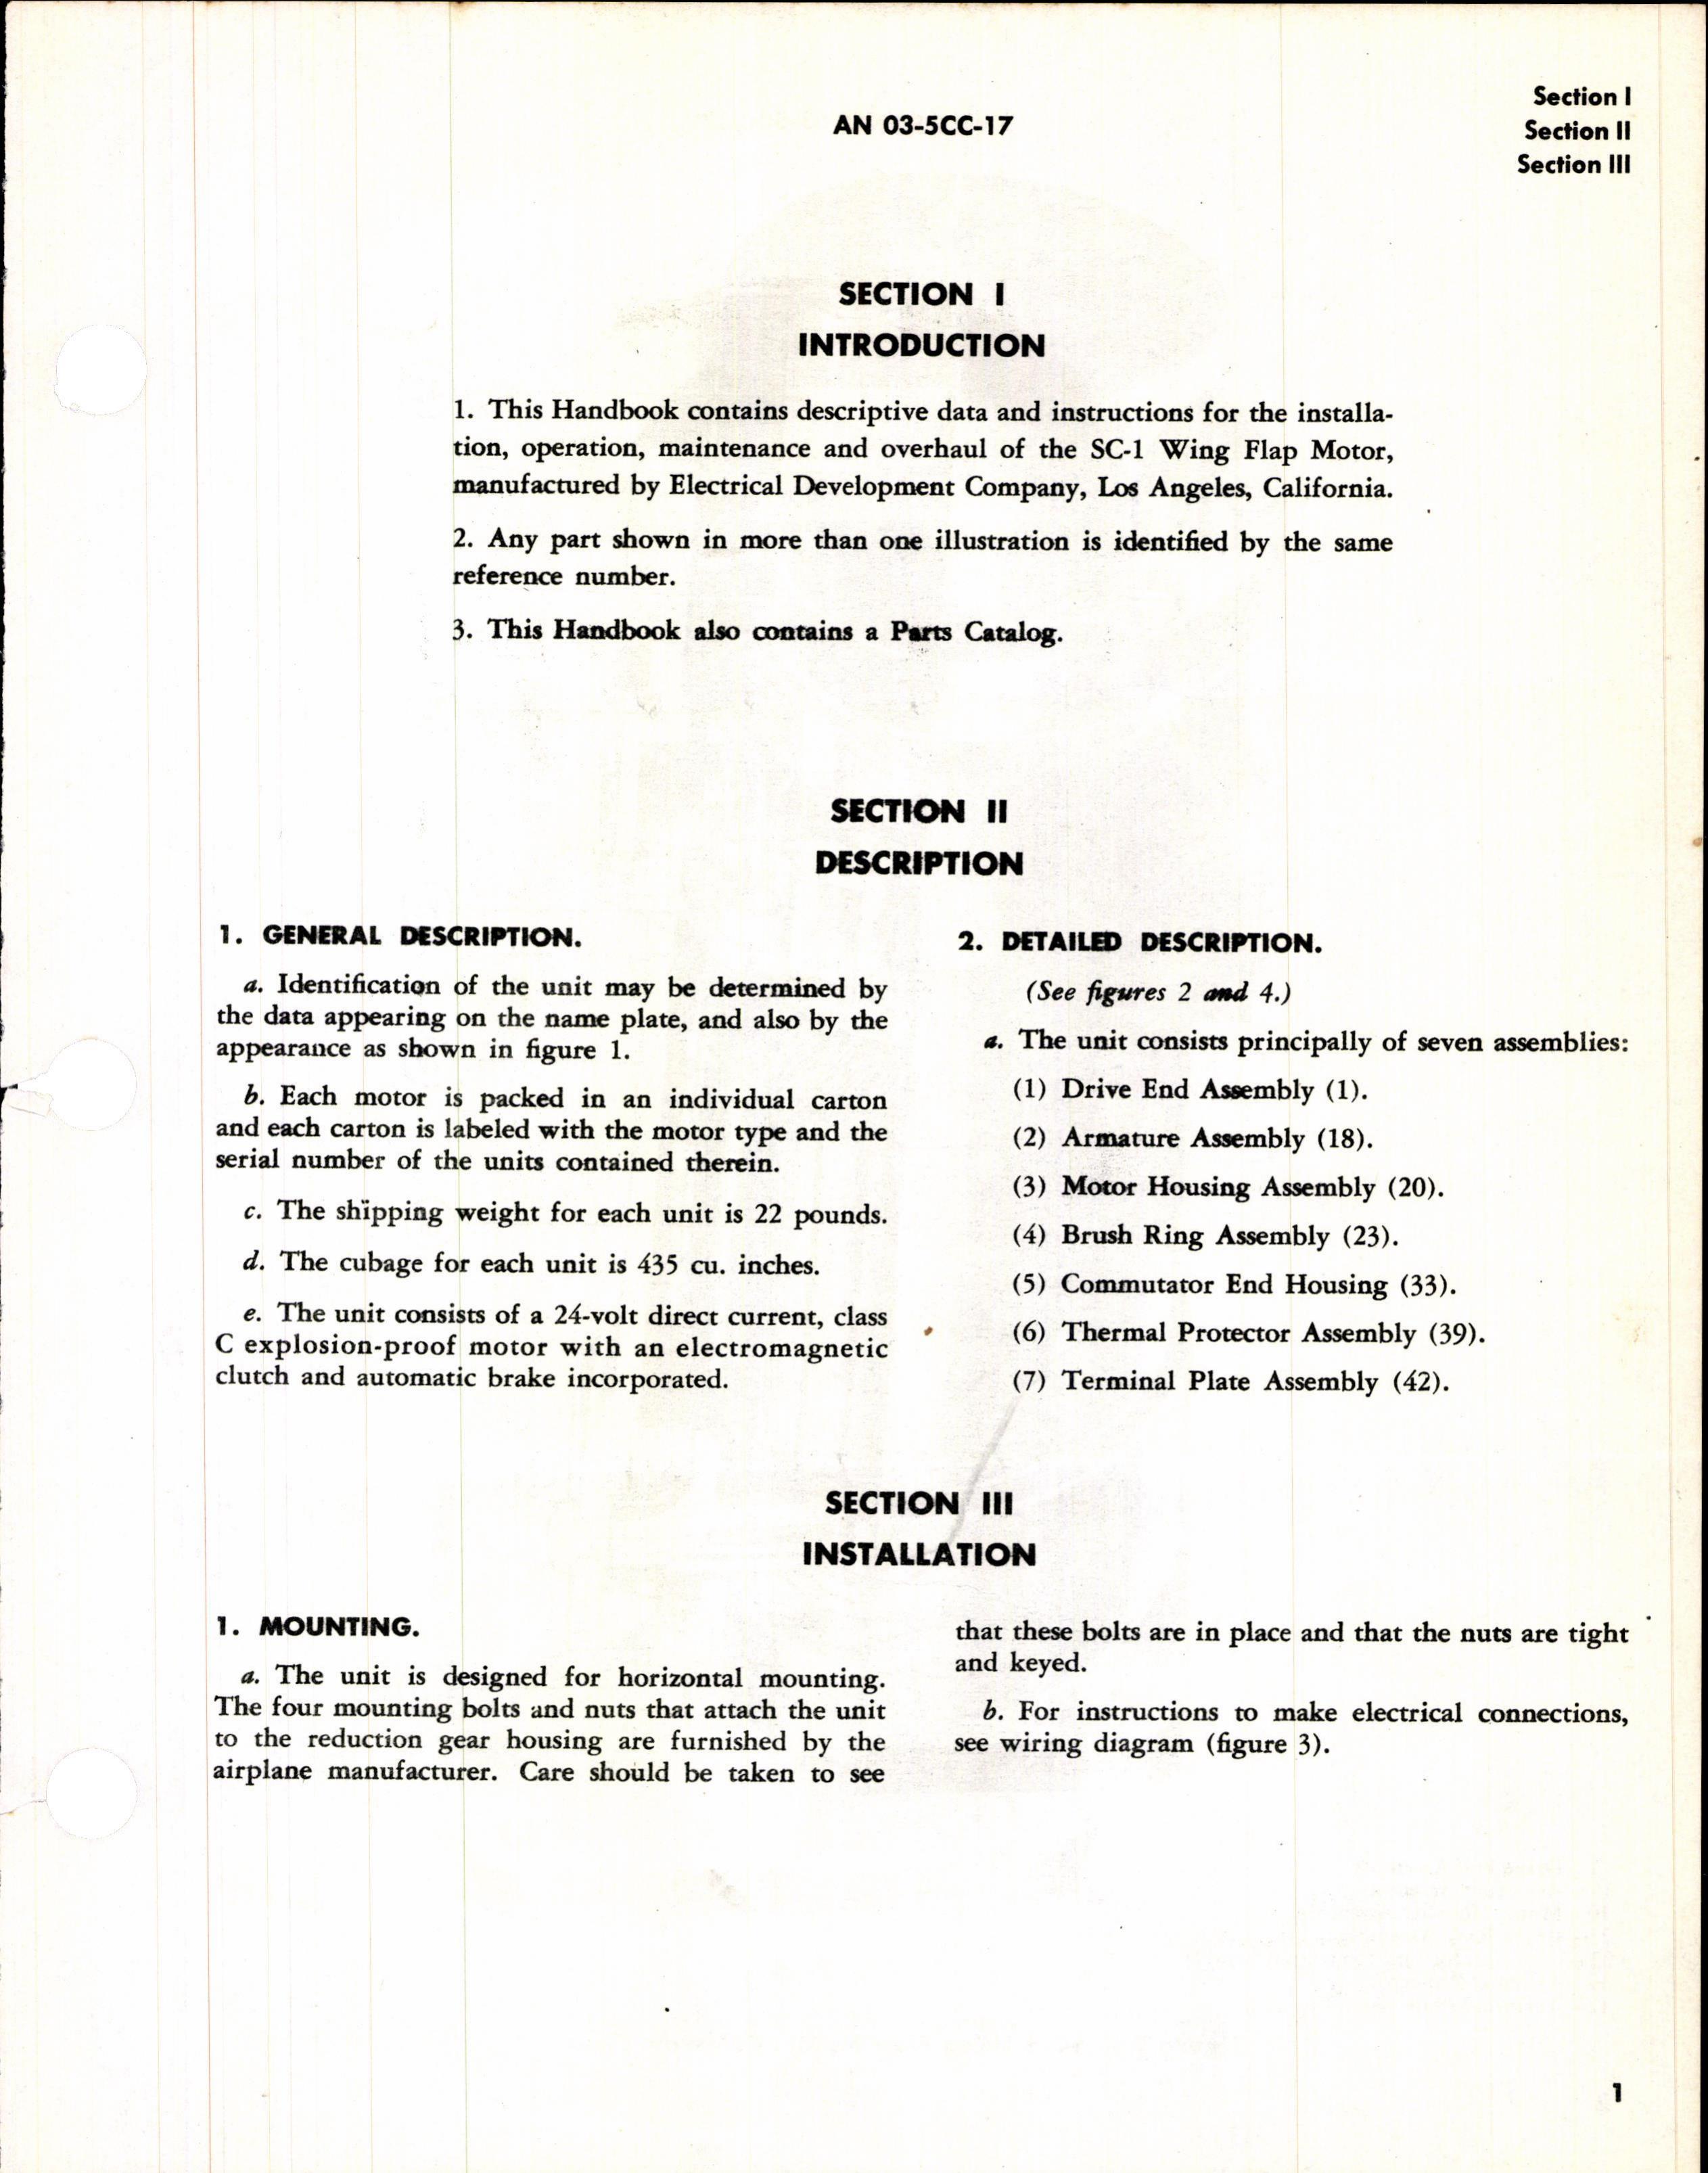 Sample page 5 from AirCorps Library document: Operation, Service, & Overhaul Inst w/ Parts Catalog for SC-1 Wing Flap Motor